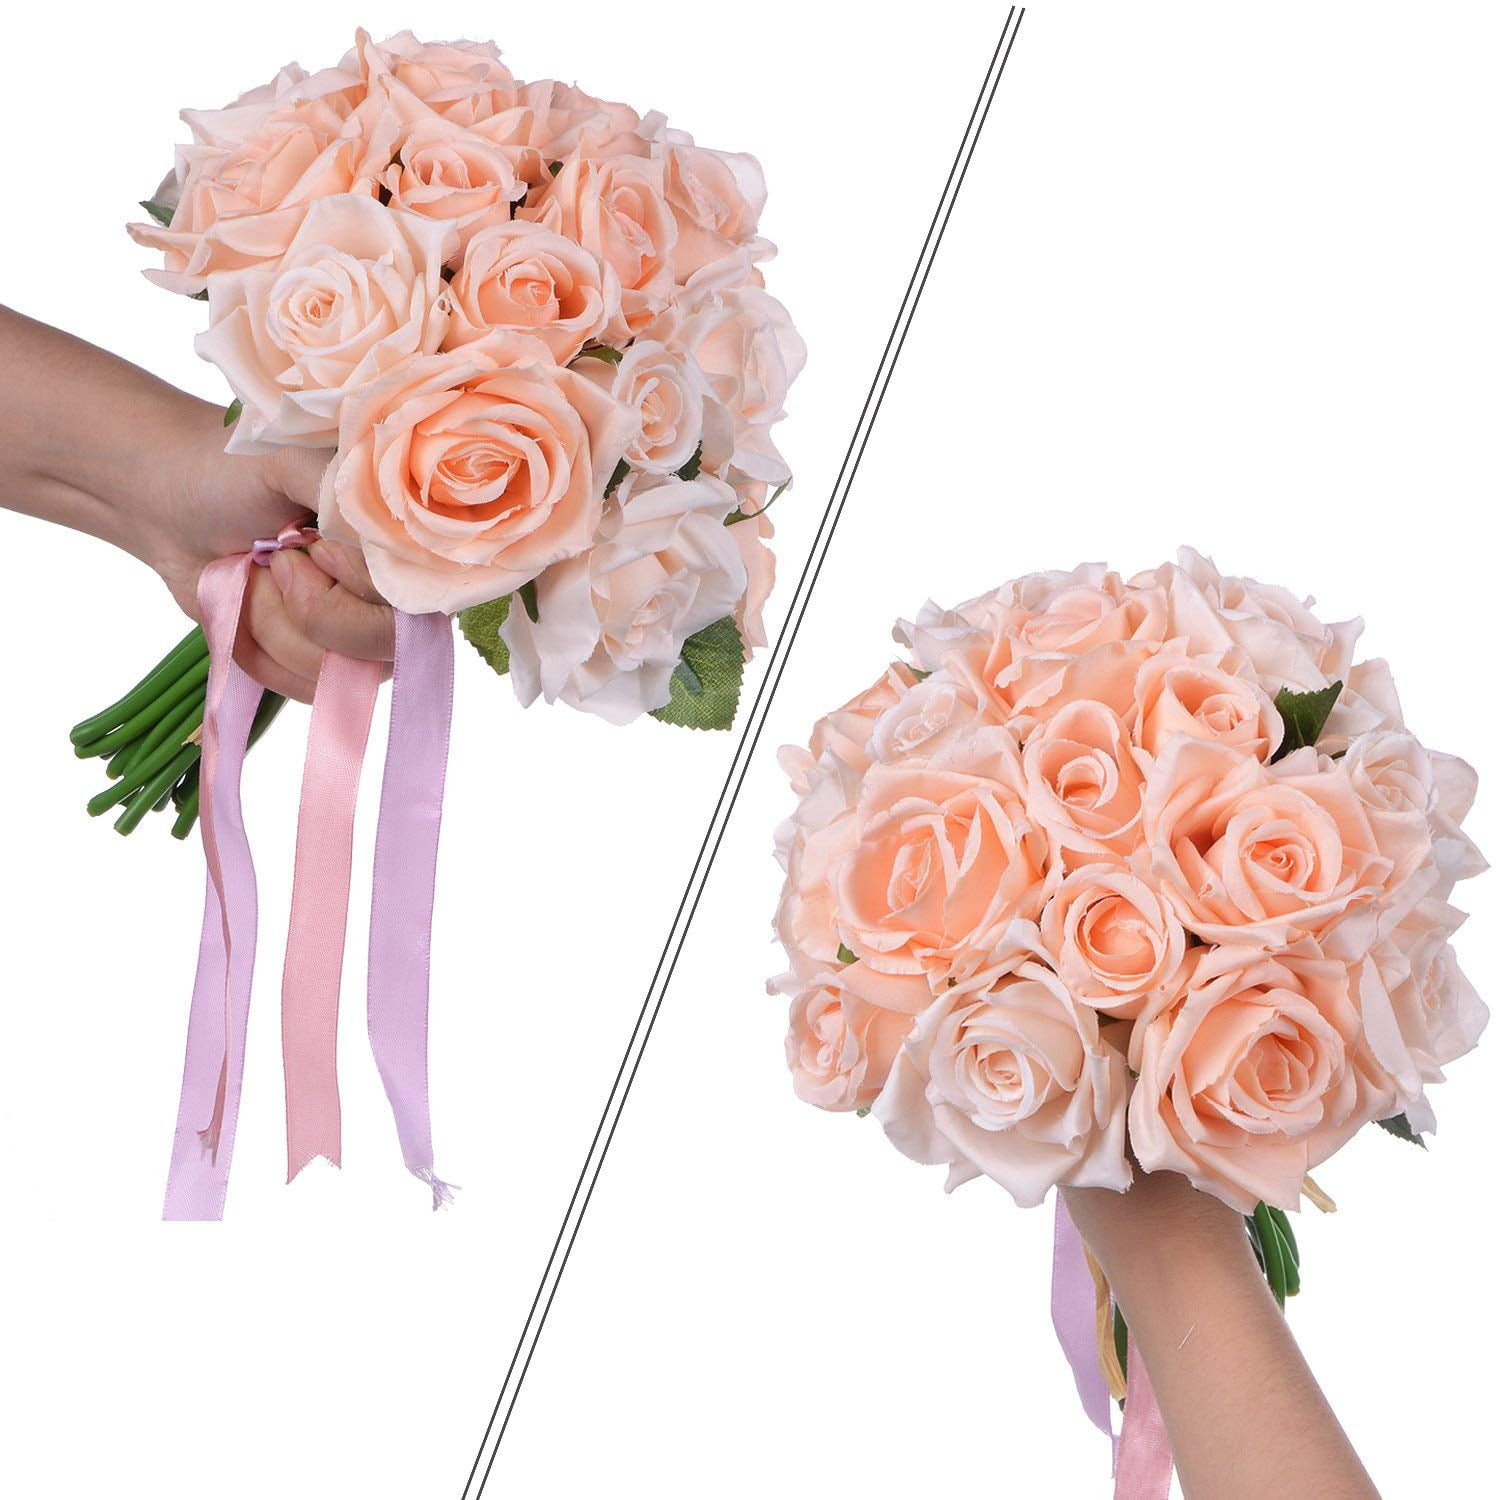 1 bunch of Rose,Simple Style,Artificial Flowers,Fake flowers Wedding flowers,floral flowers Arrangement Wedding Home Decoration